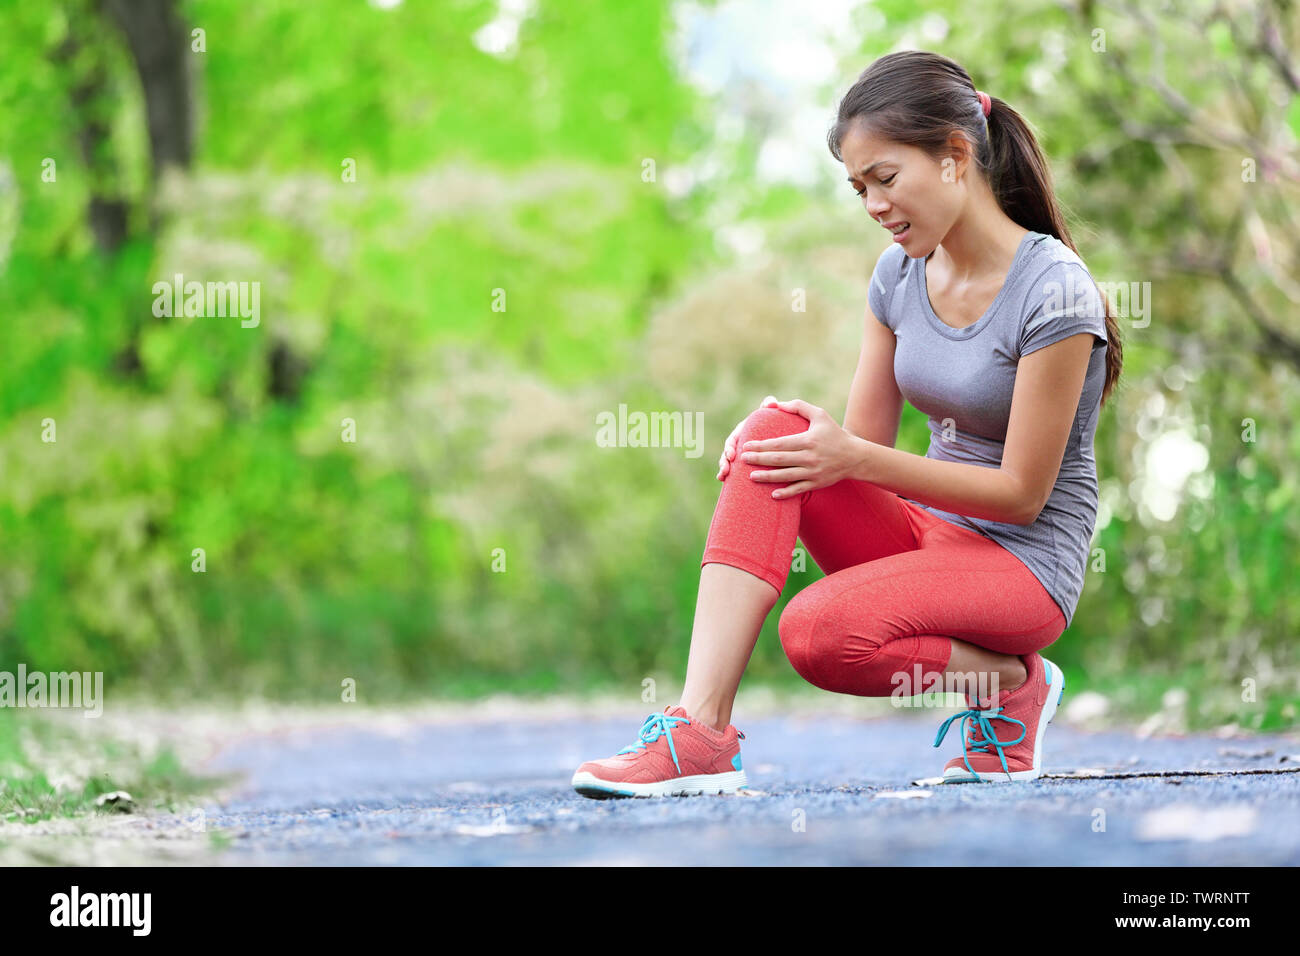 Knee Injury - sports running knee injuries on woman in pain. Female runner with pain from sprain knee. Close up of legs, muscle and knee outdoors. Stock Photo